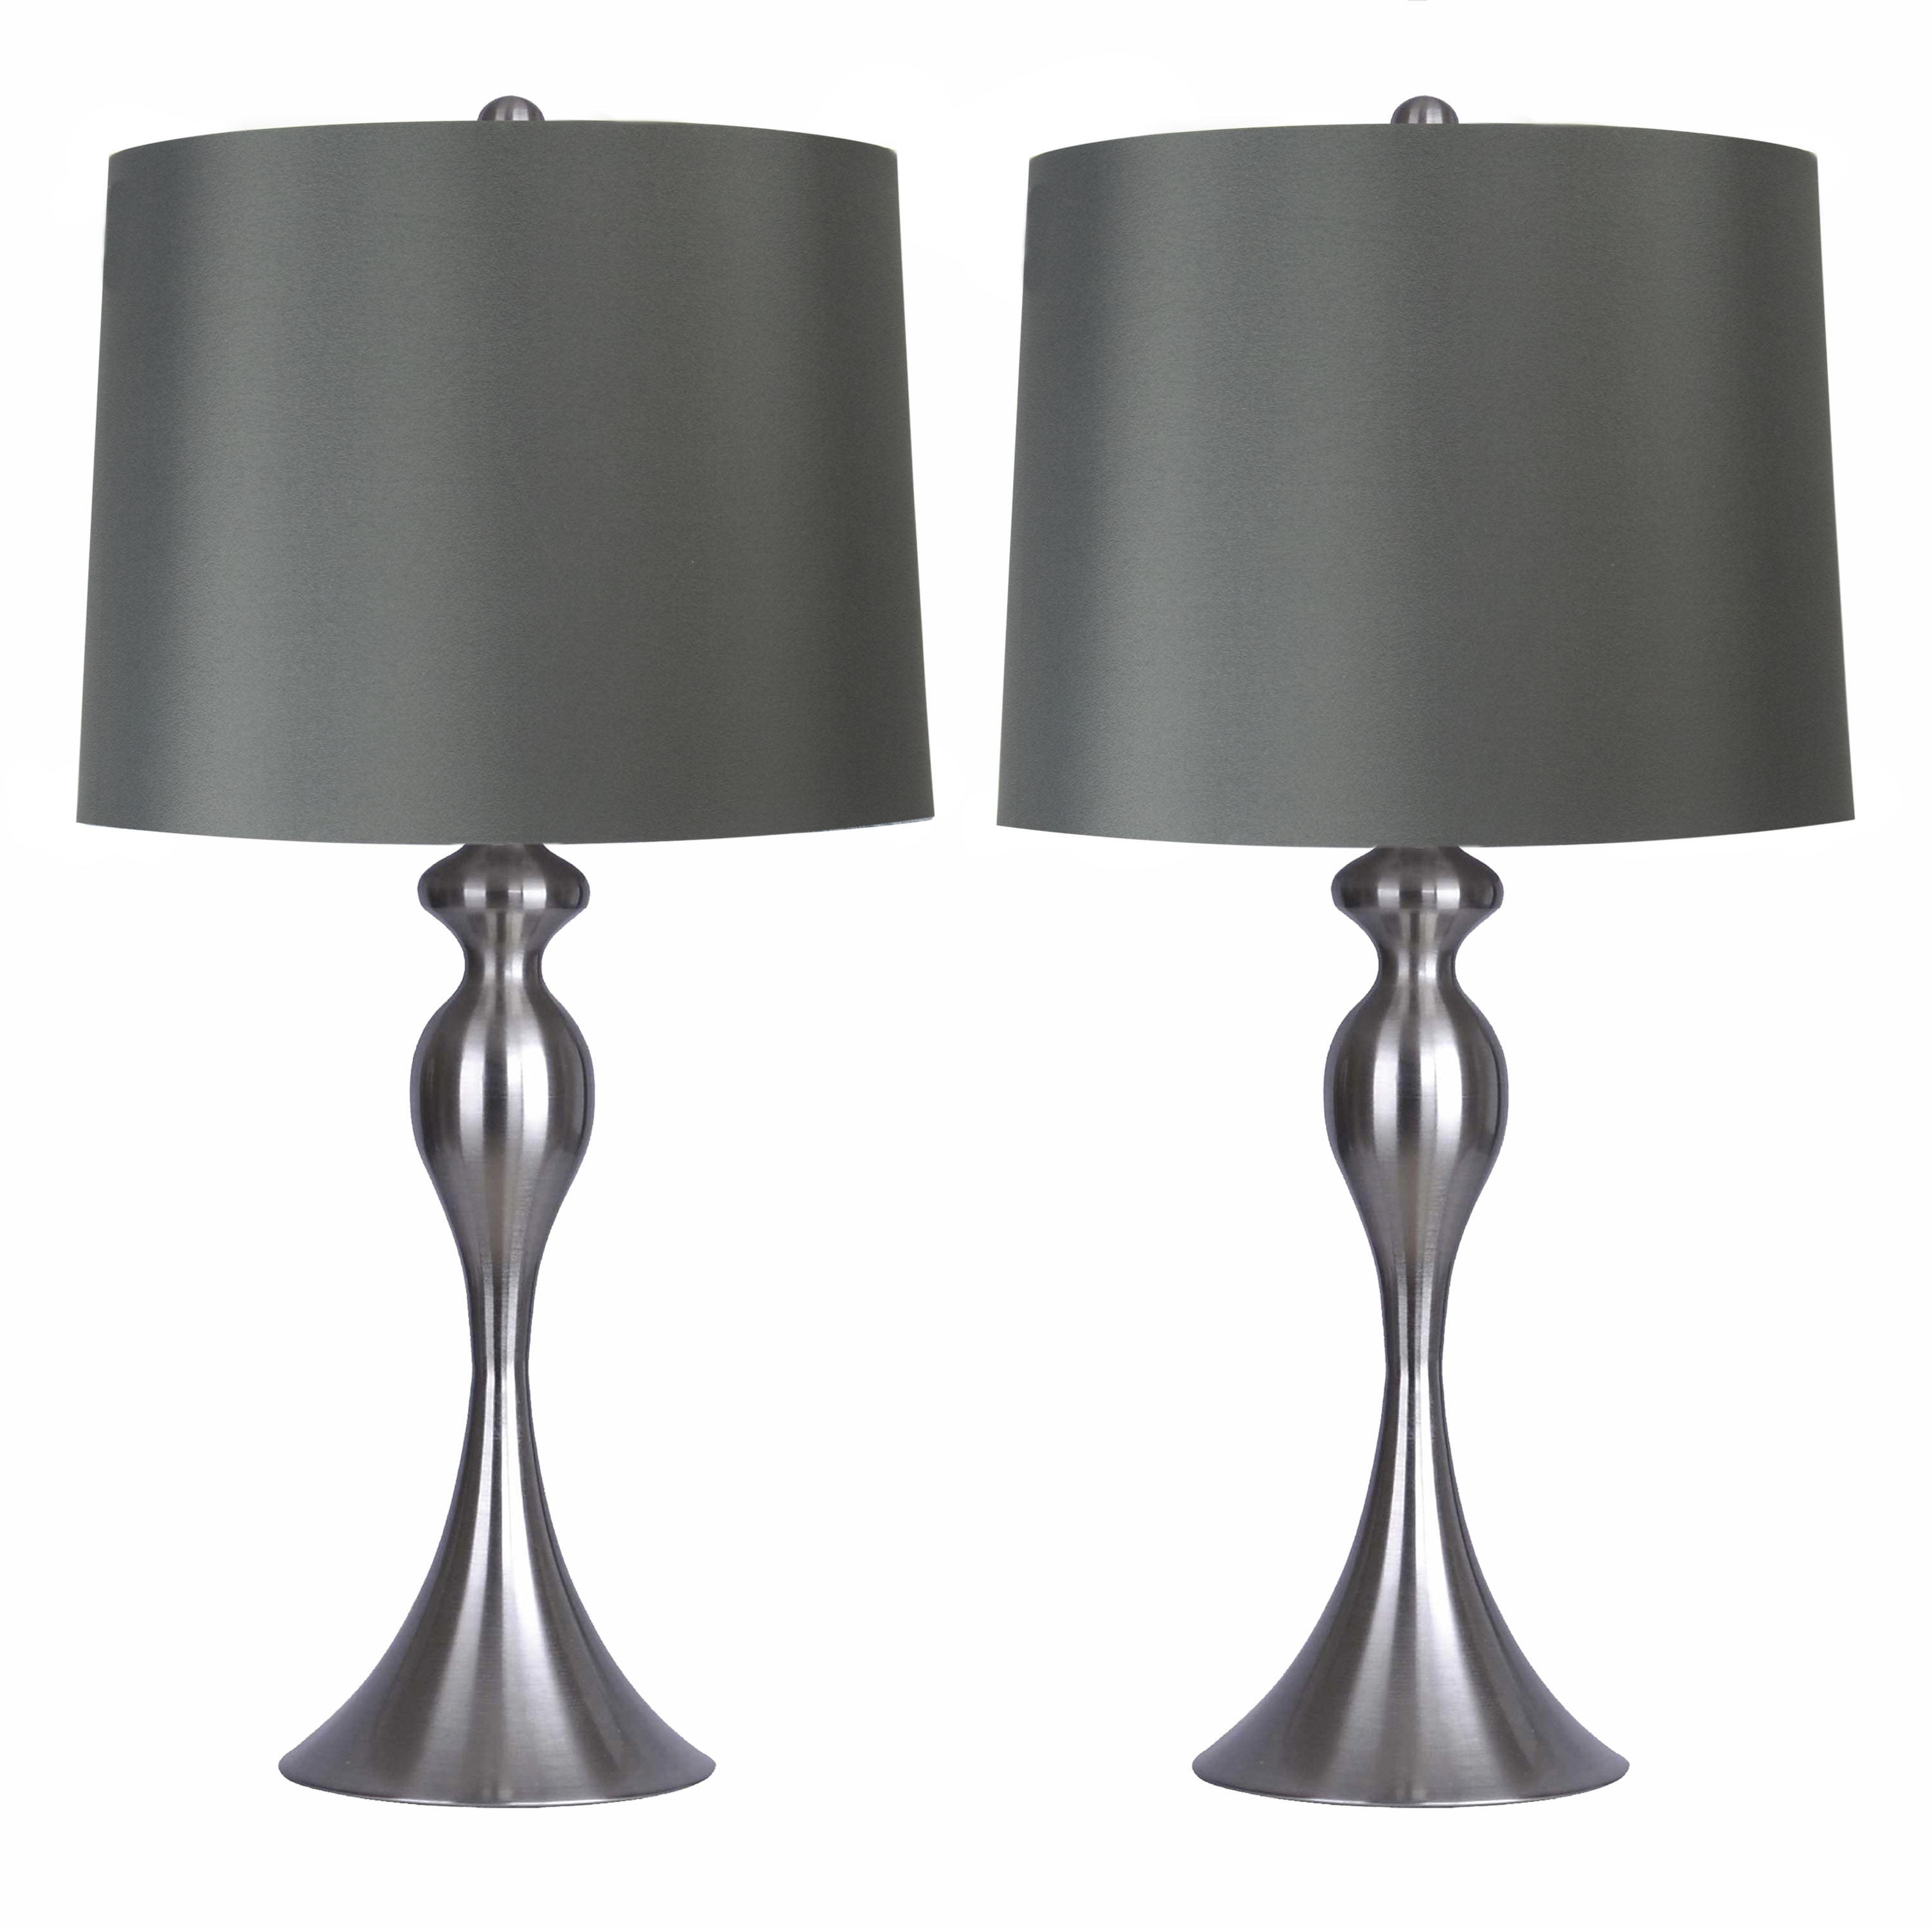 Grandview Gallery Table Lamps with Dark Grey Lamp Shade, Set of 2